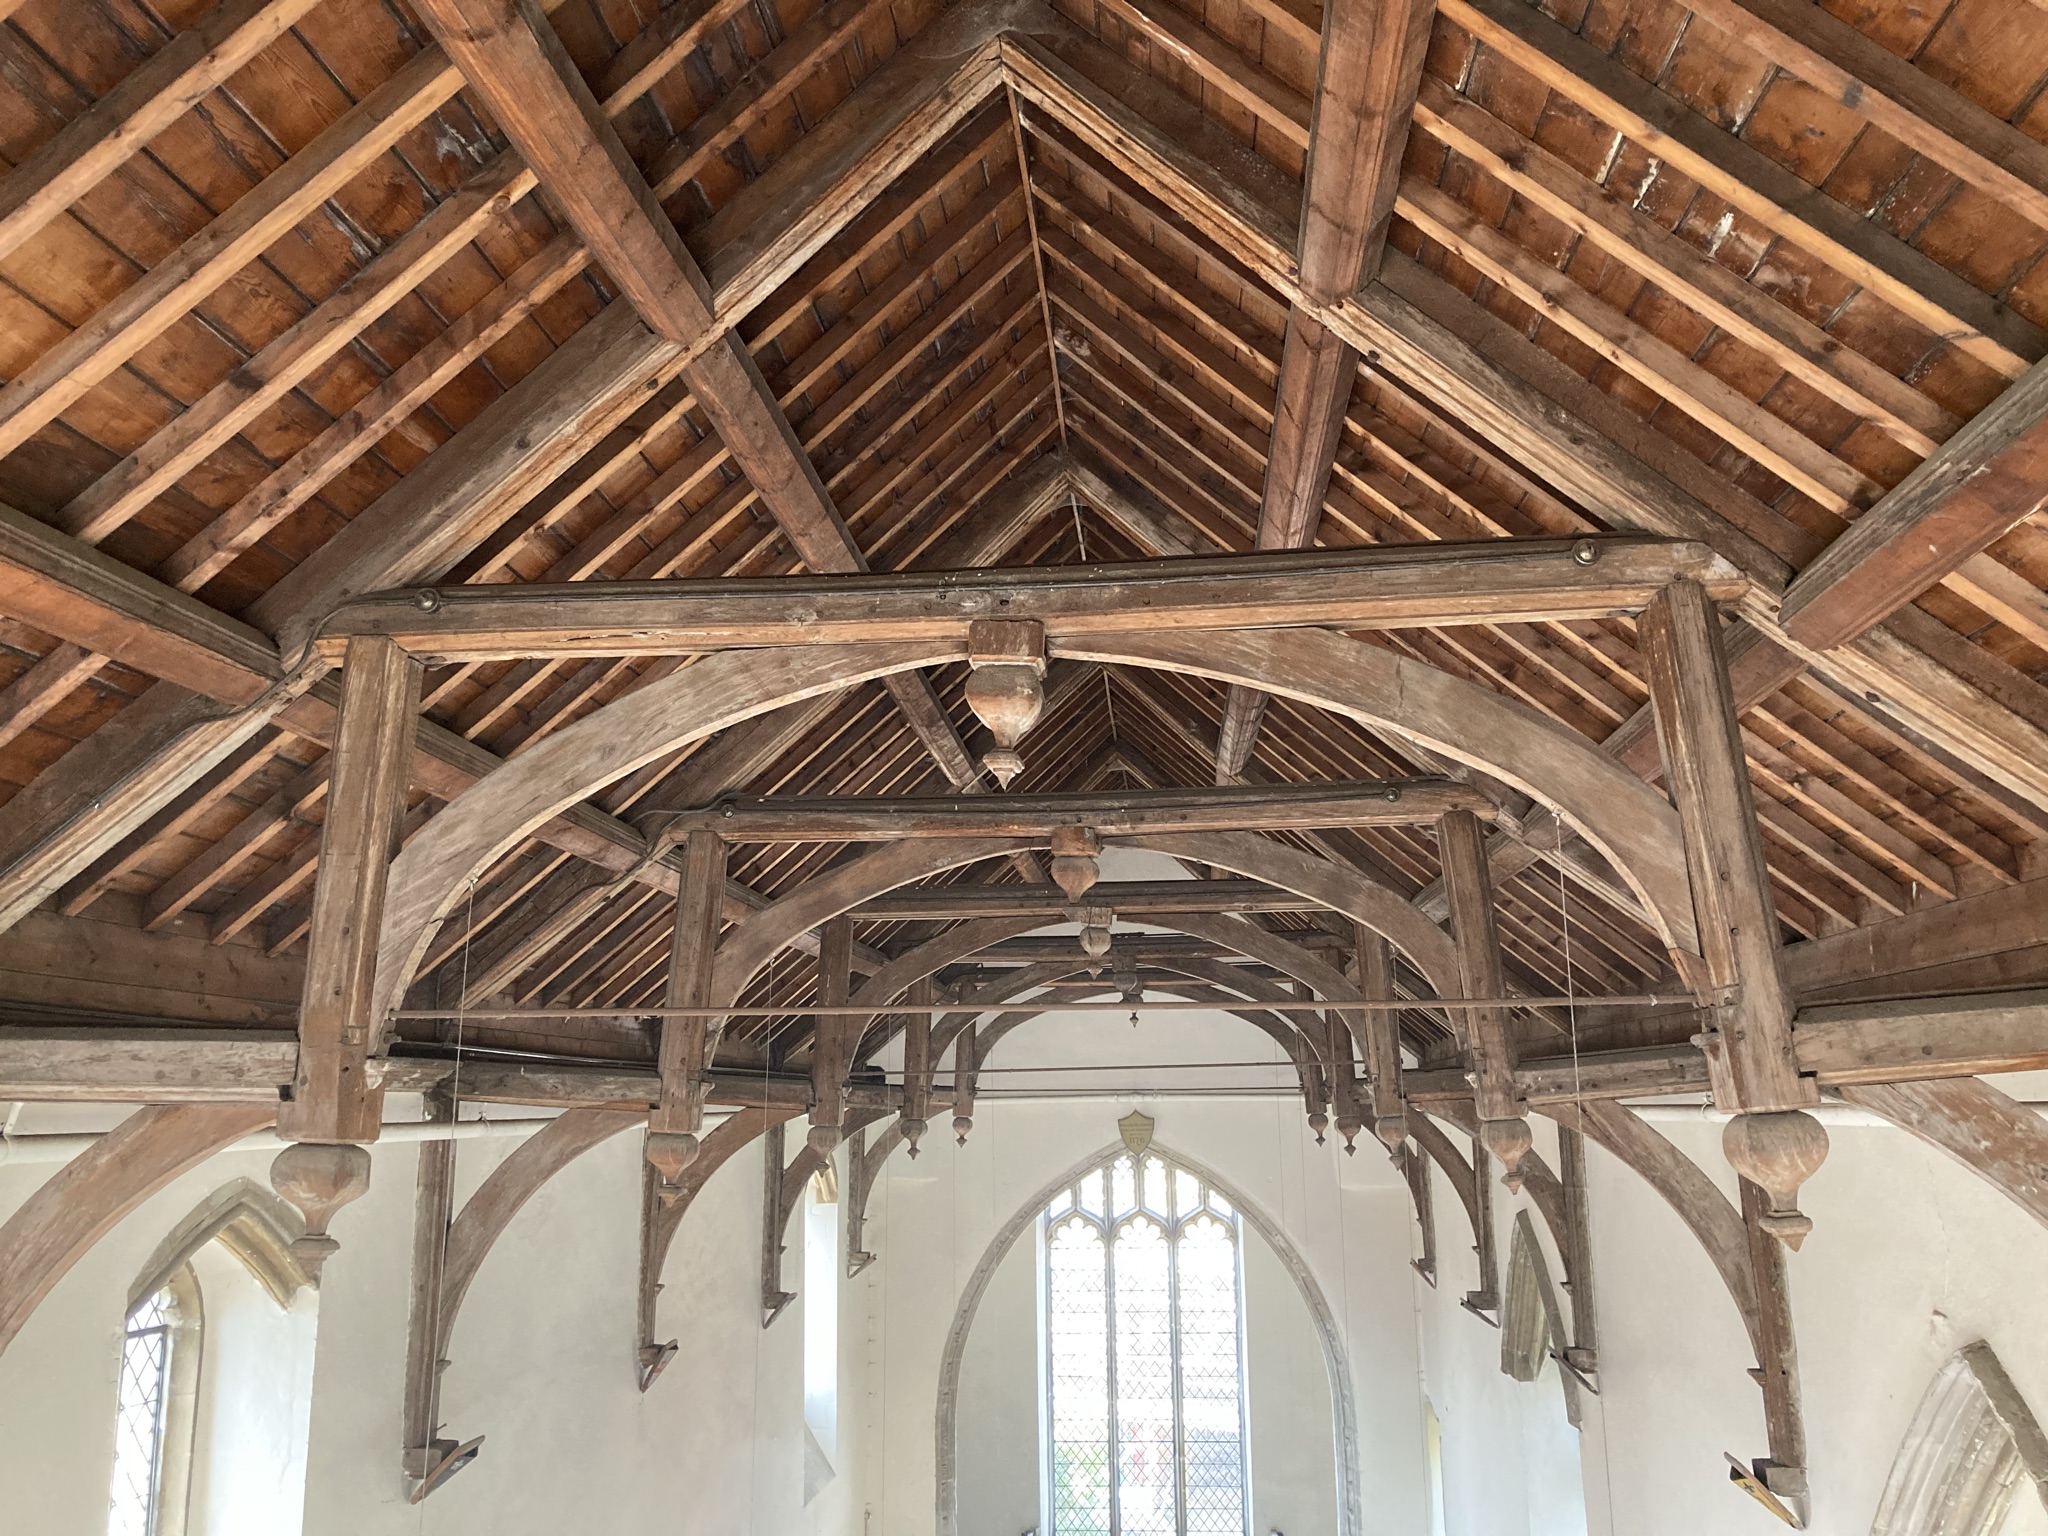 The wooden hammerbeam roof of Becket's Chapel can be seen. Wooden timbers with a series of central wooden arches. The arched plain glass chapel window can be seen in the background.